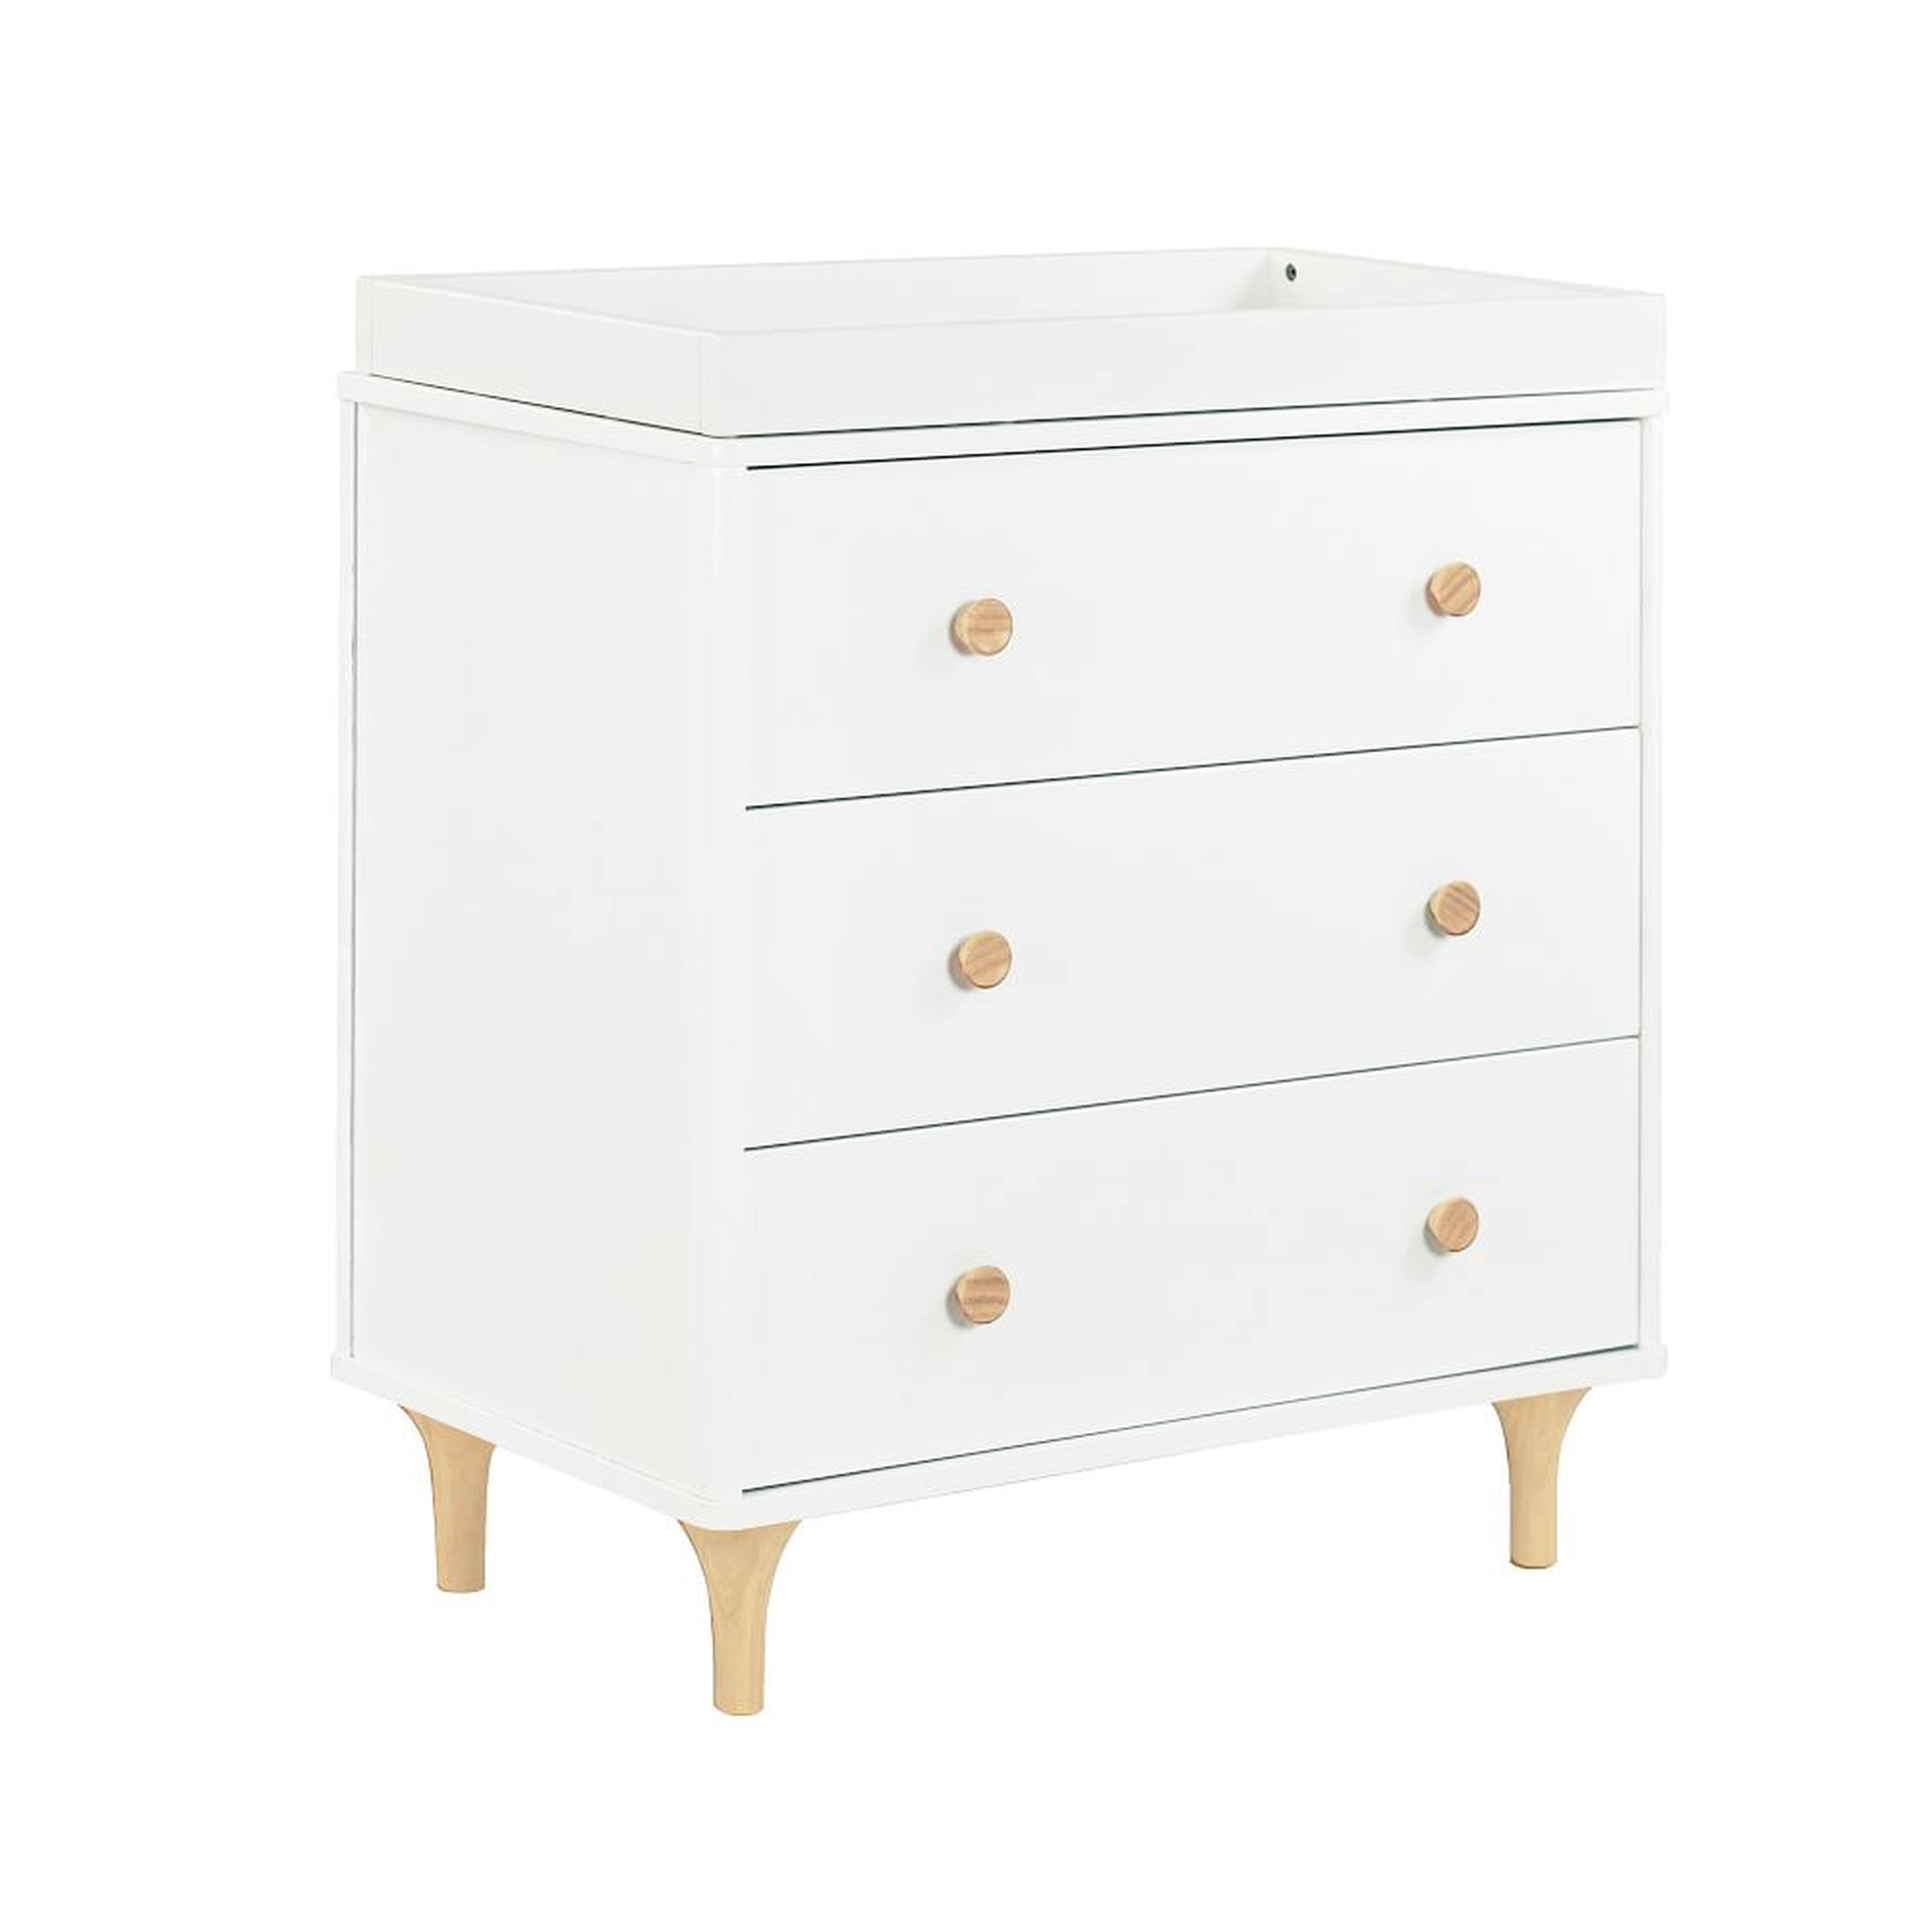 Lolly 3-Drawer Changer Dresser with Removable Changing Tray, White/Natural, WE Kids - West Elm